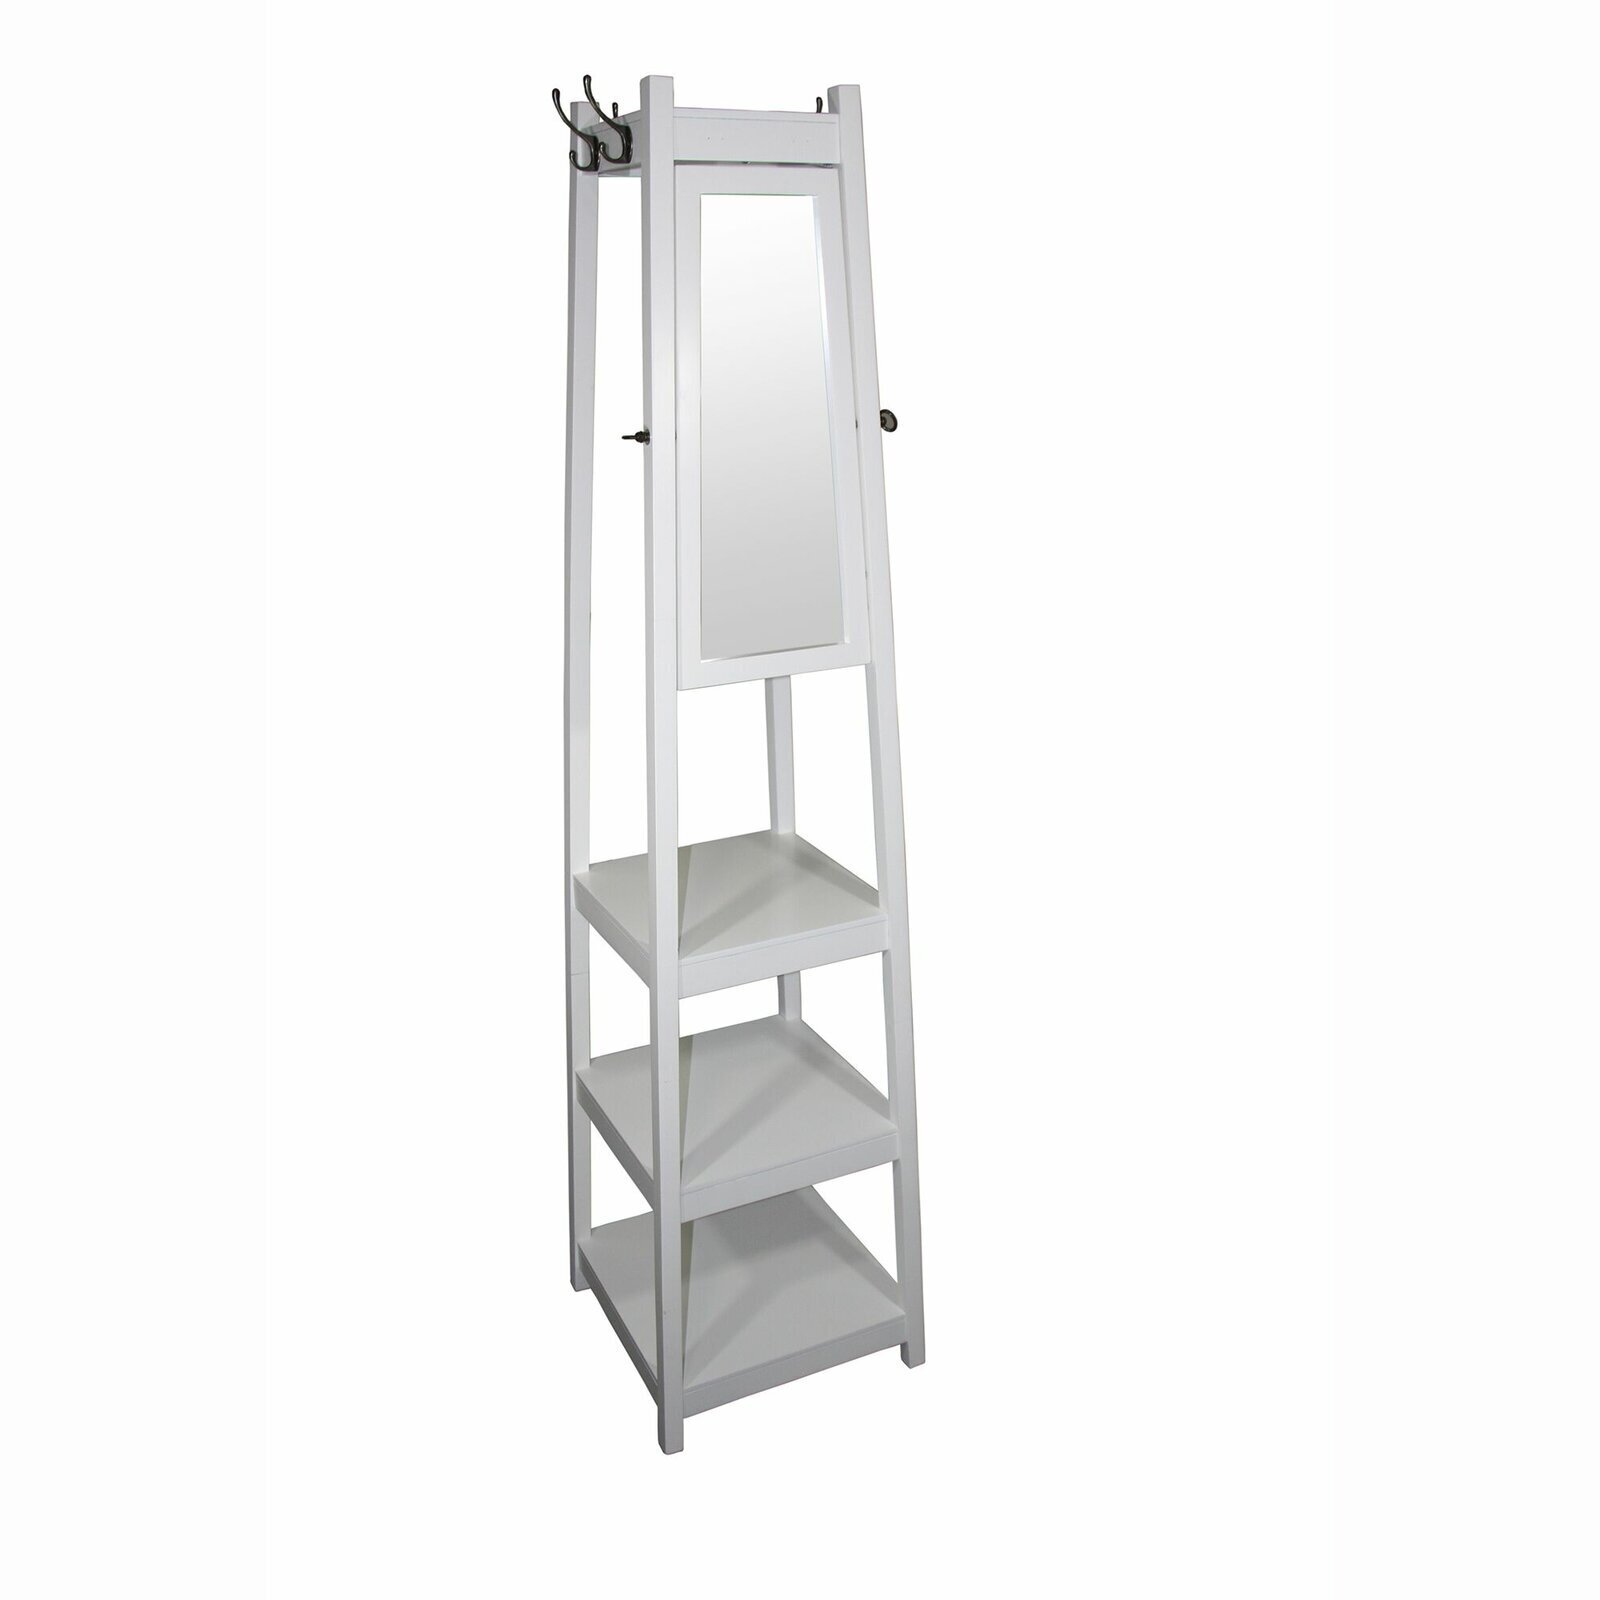 Tower styled Coat Rack With Mirror and Shelves